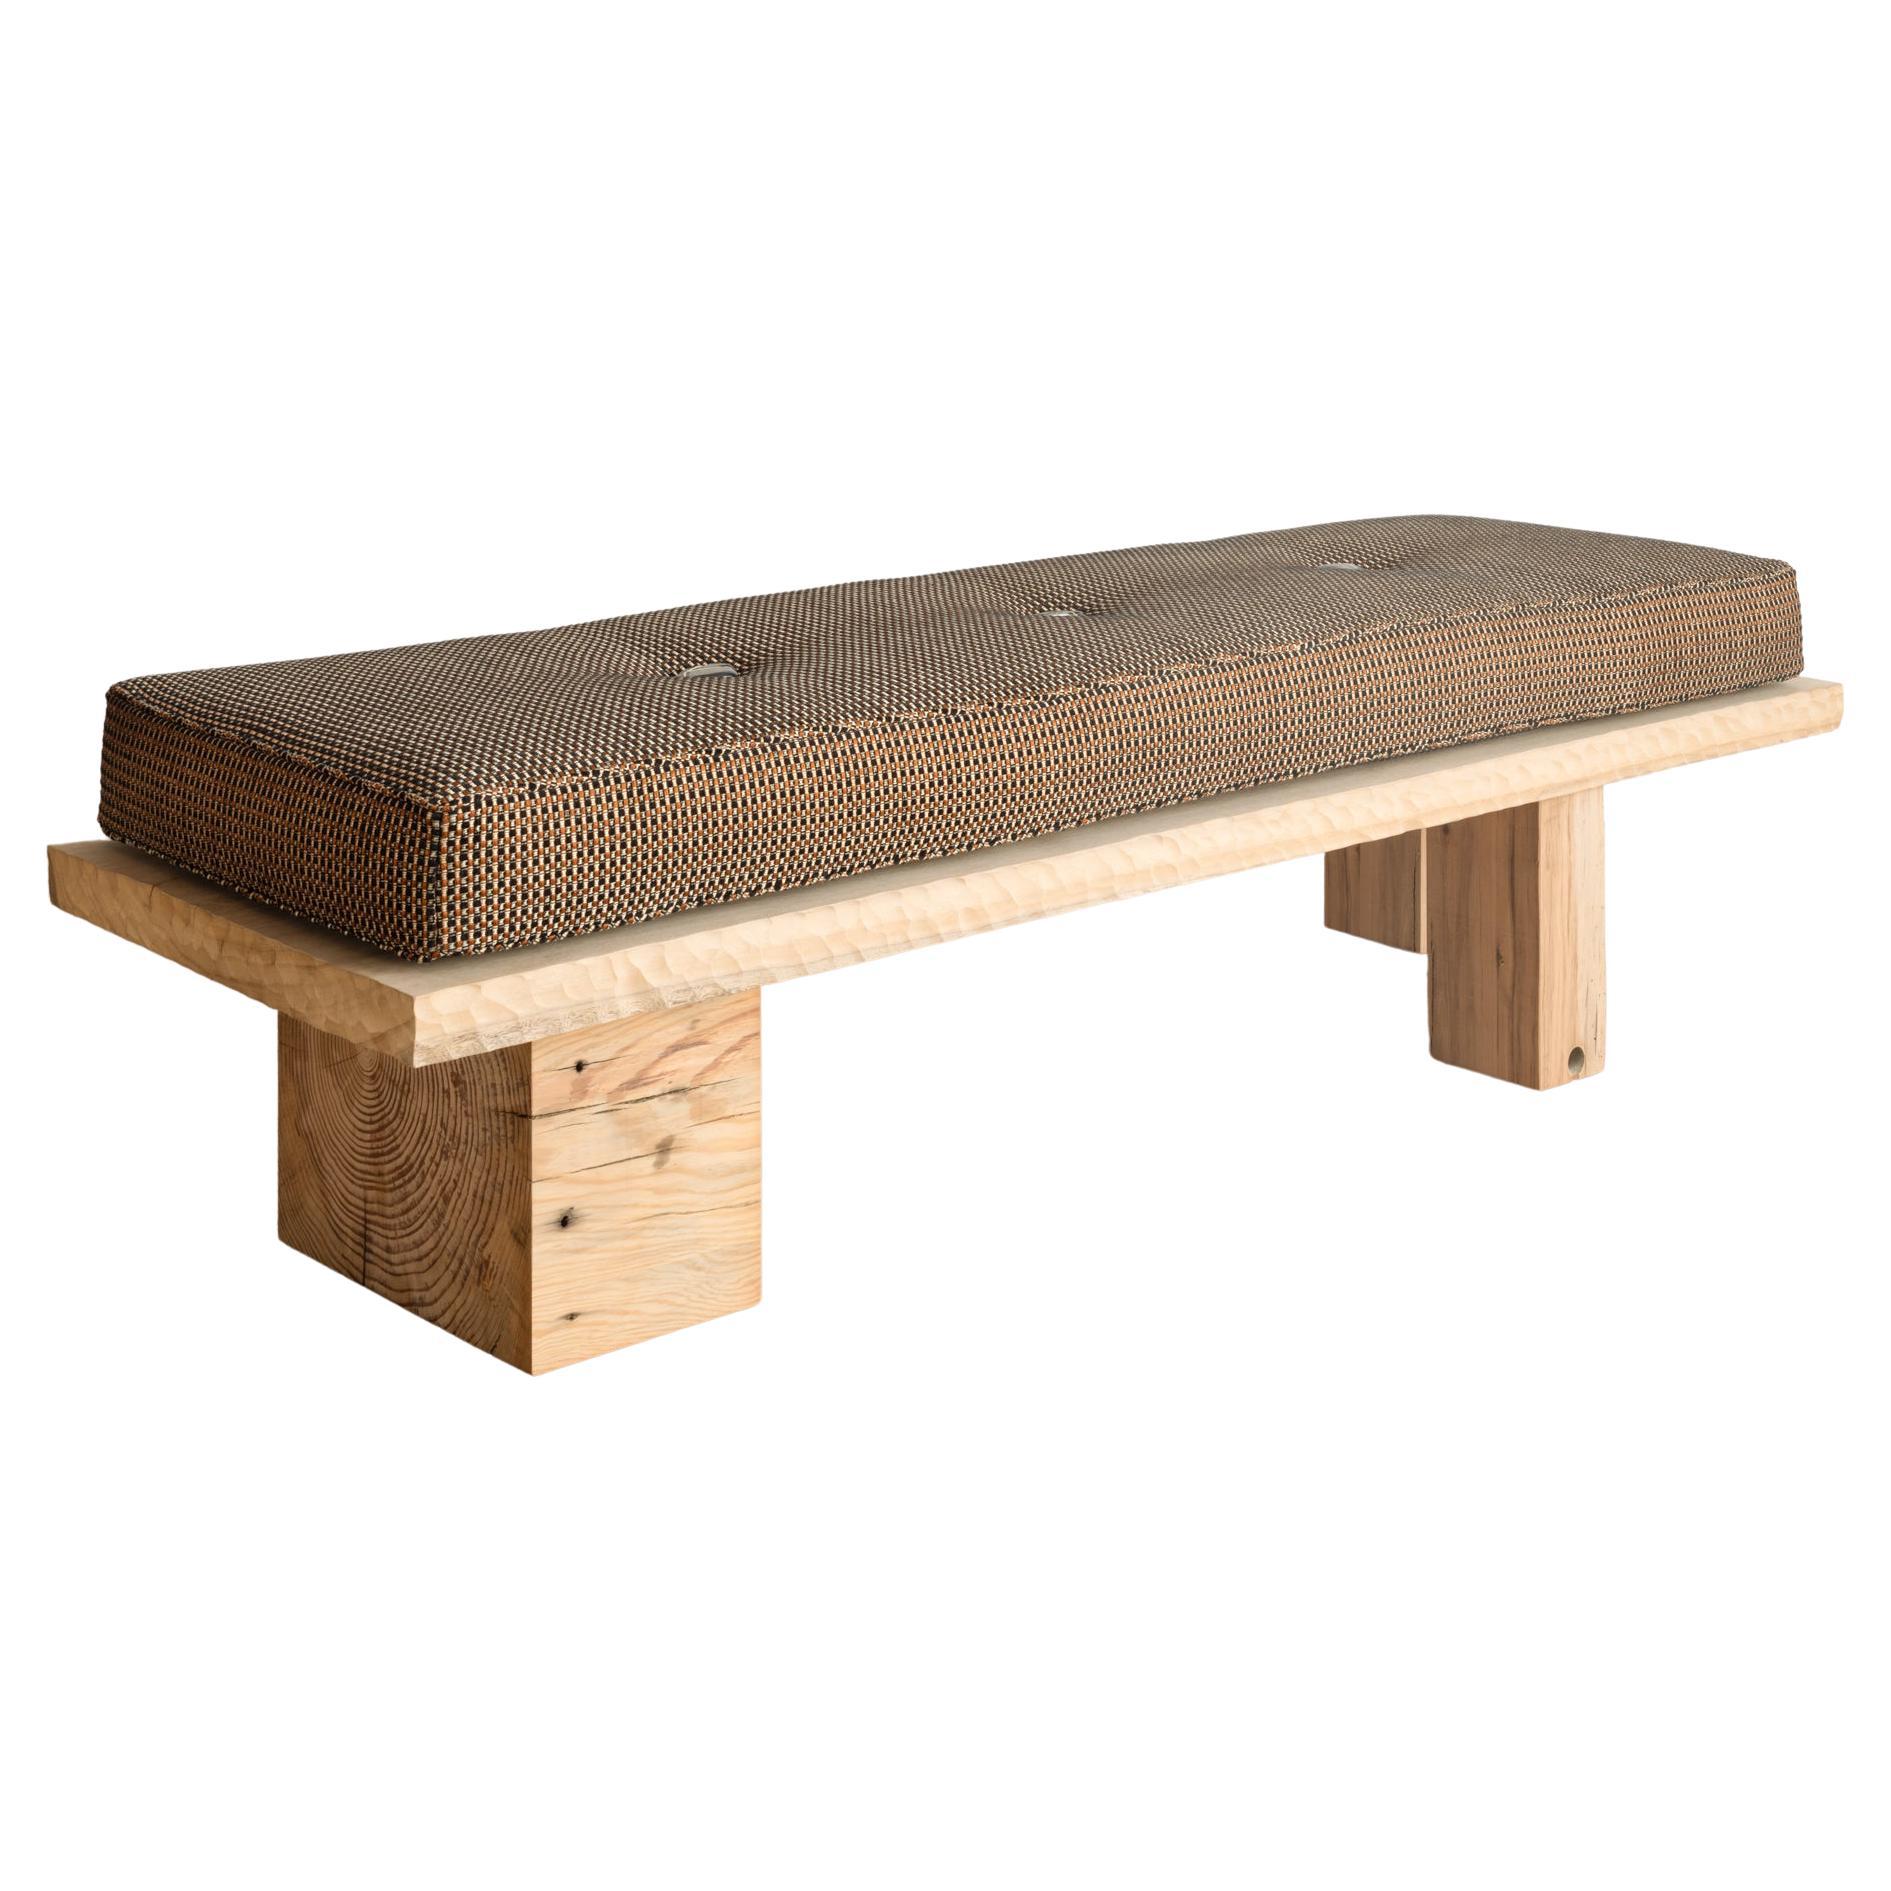 Hand-carved Wooden Bench with Upholstered Seat Cushion For Sale